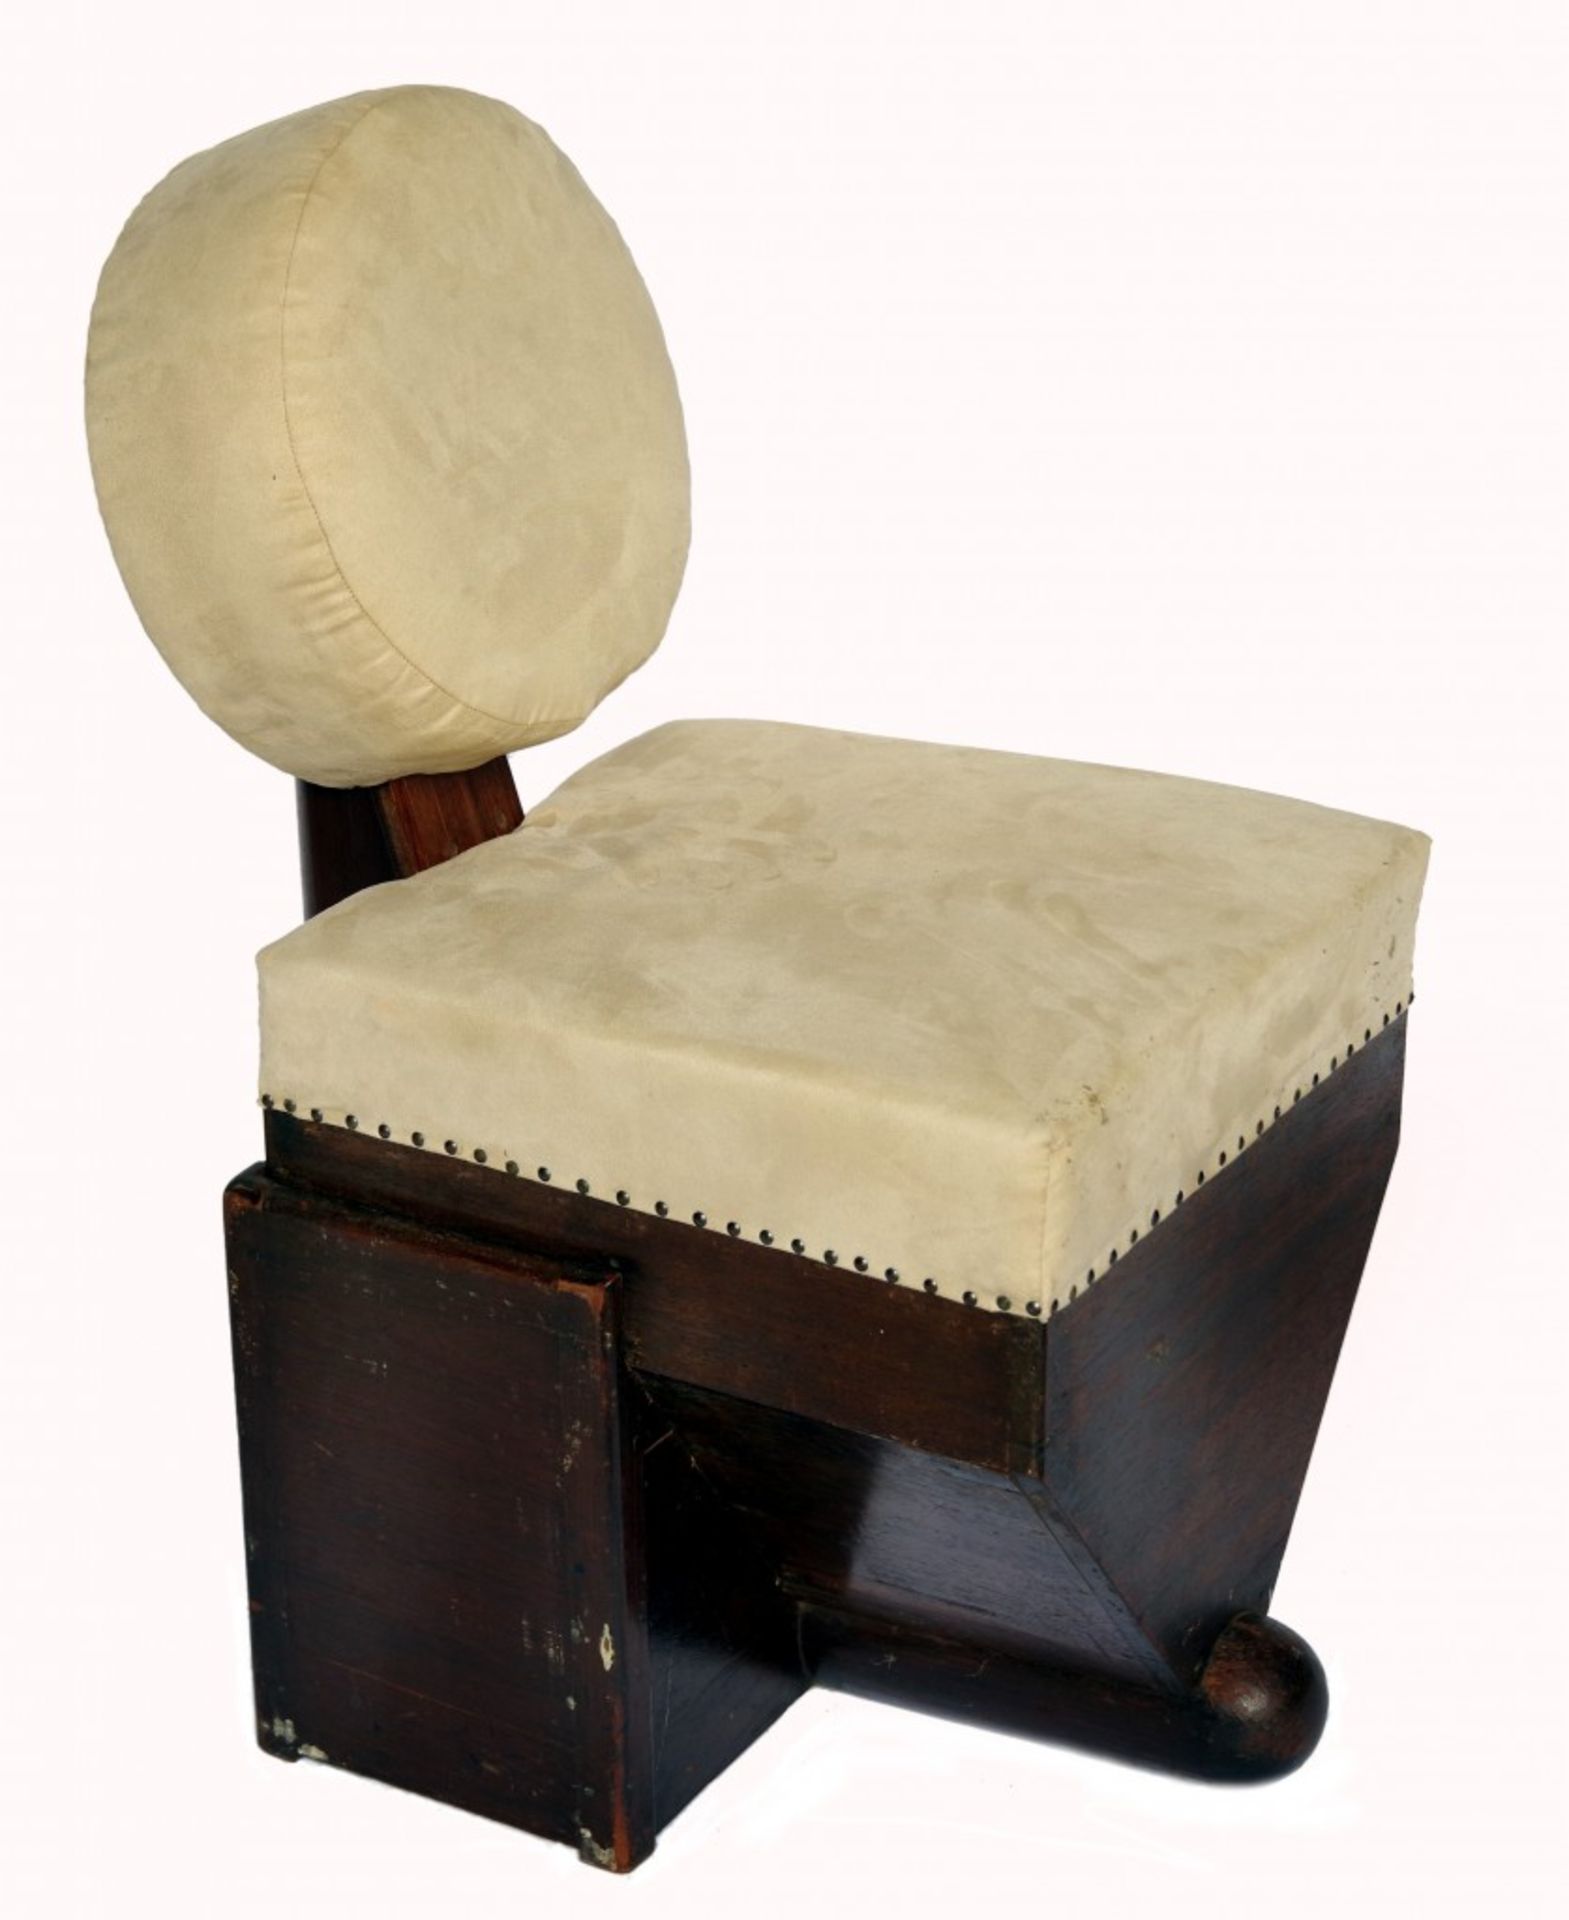 Rondo-Cubist Writing Desk with Chair - Image 4 of 5